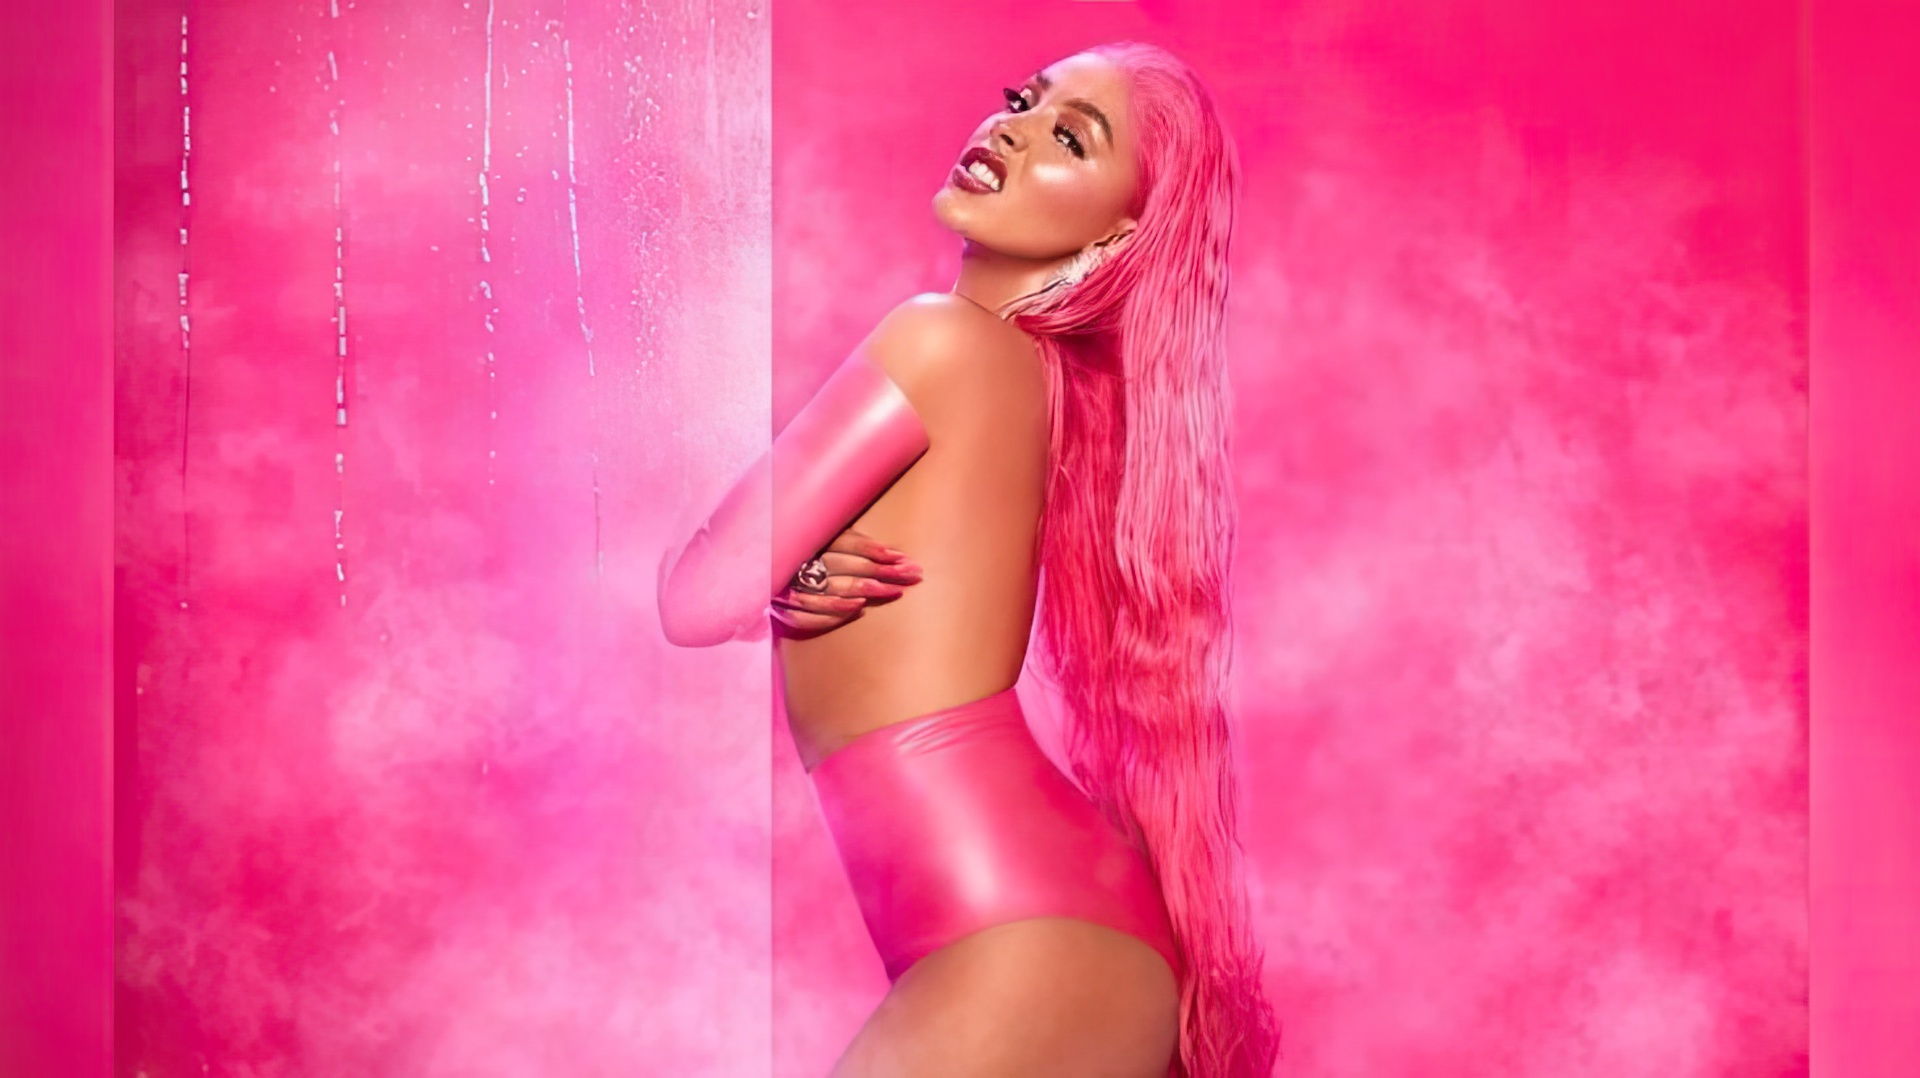 Doja Cat on the cover of Hot Pink